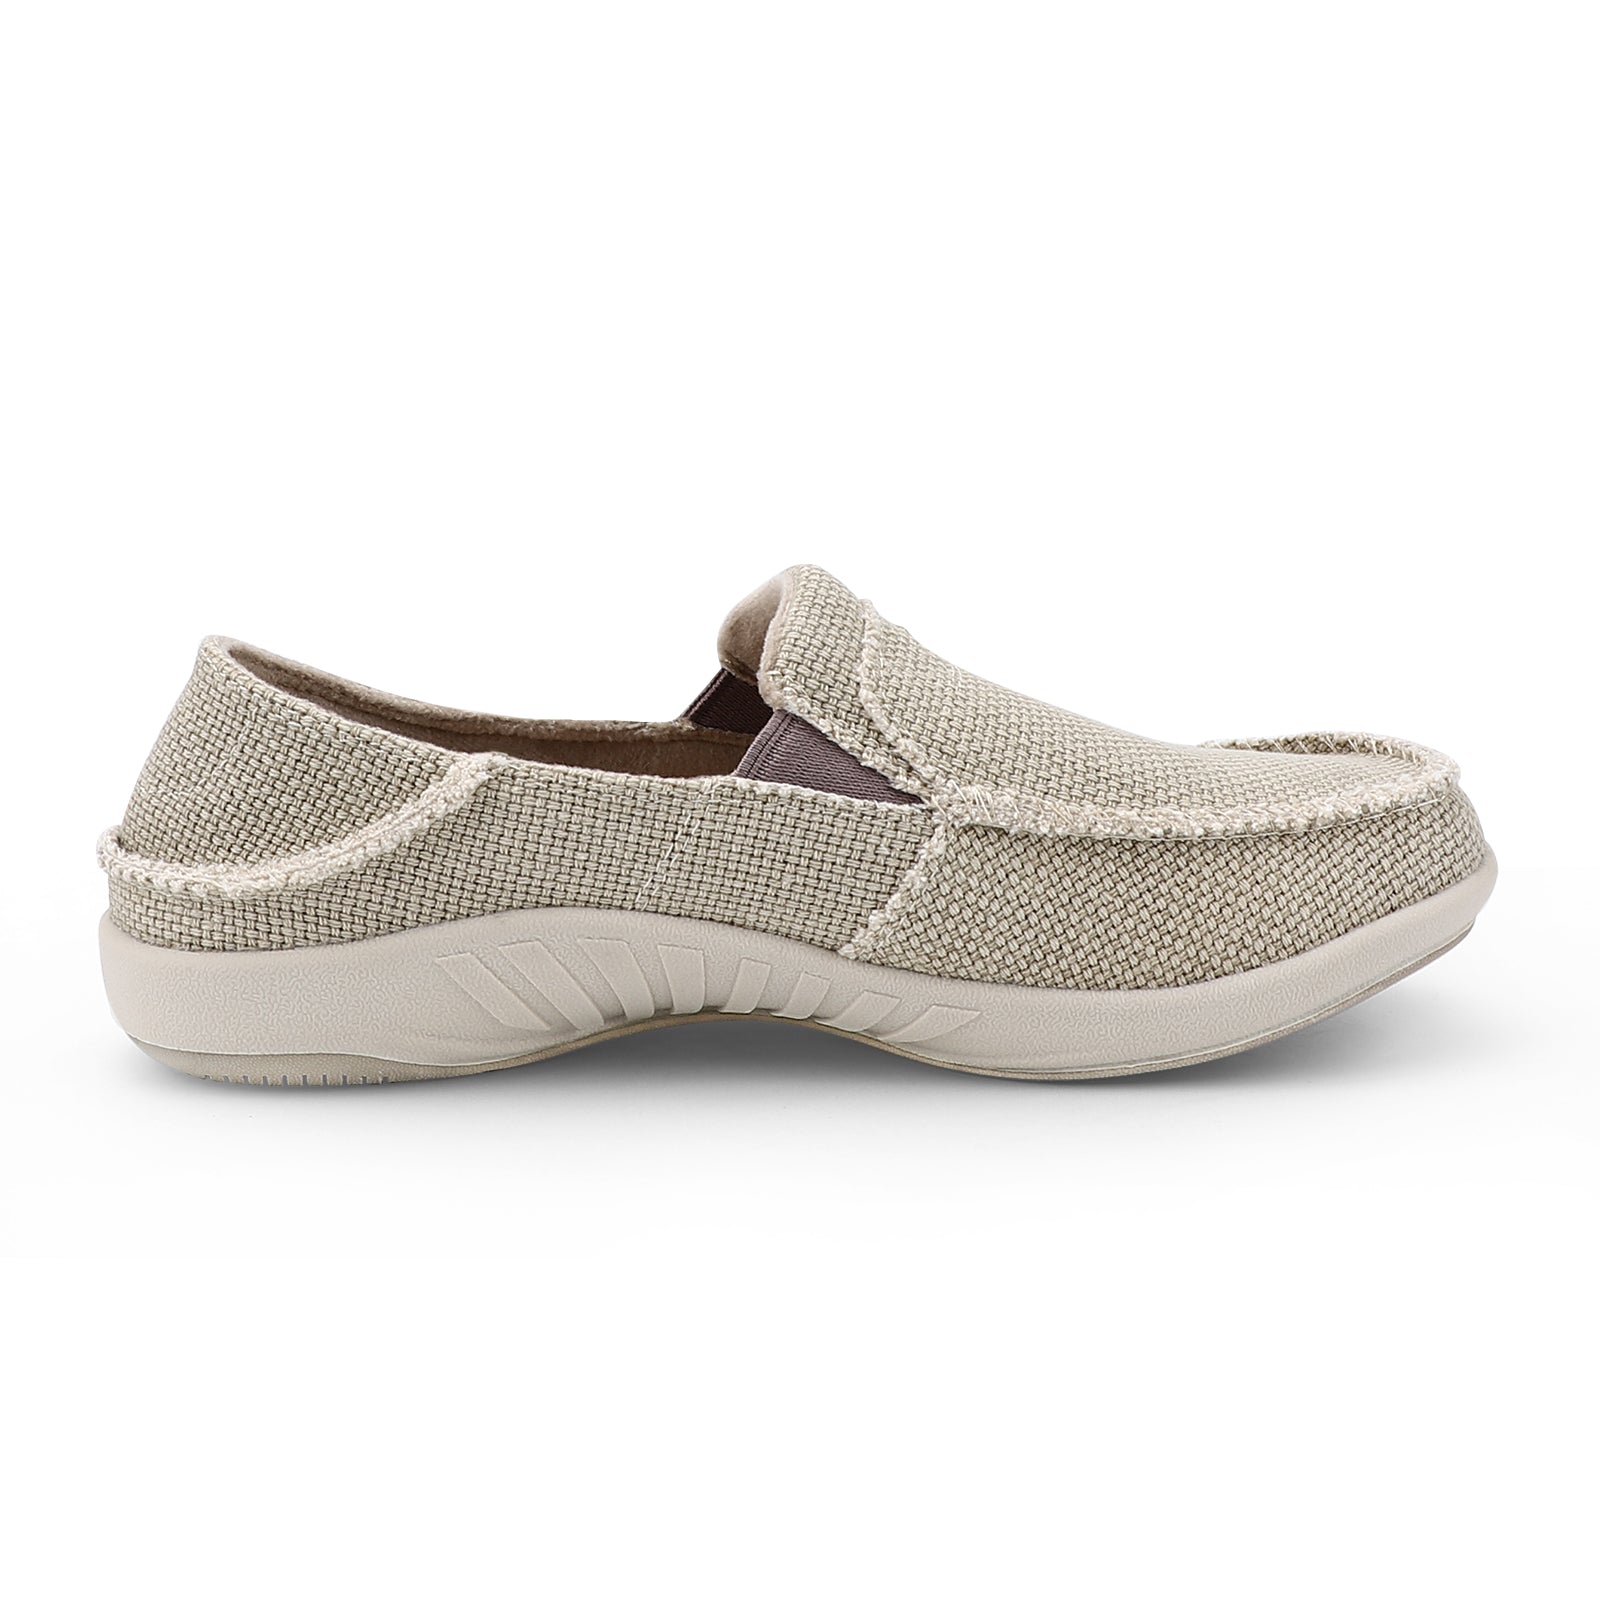 Women's Canvas Orthopedic Slip On Shoes With Arch Support - GECKOMAN